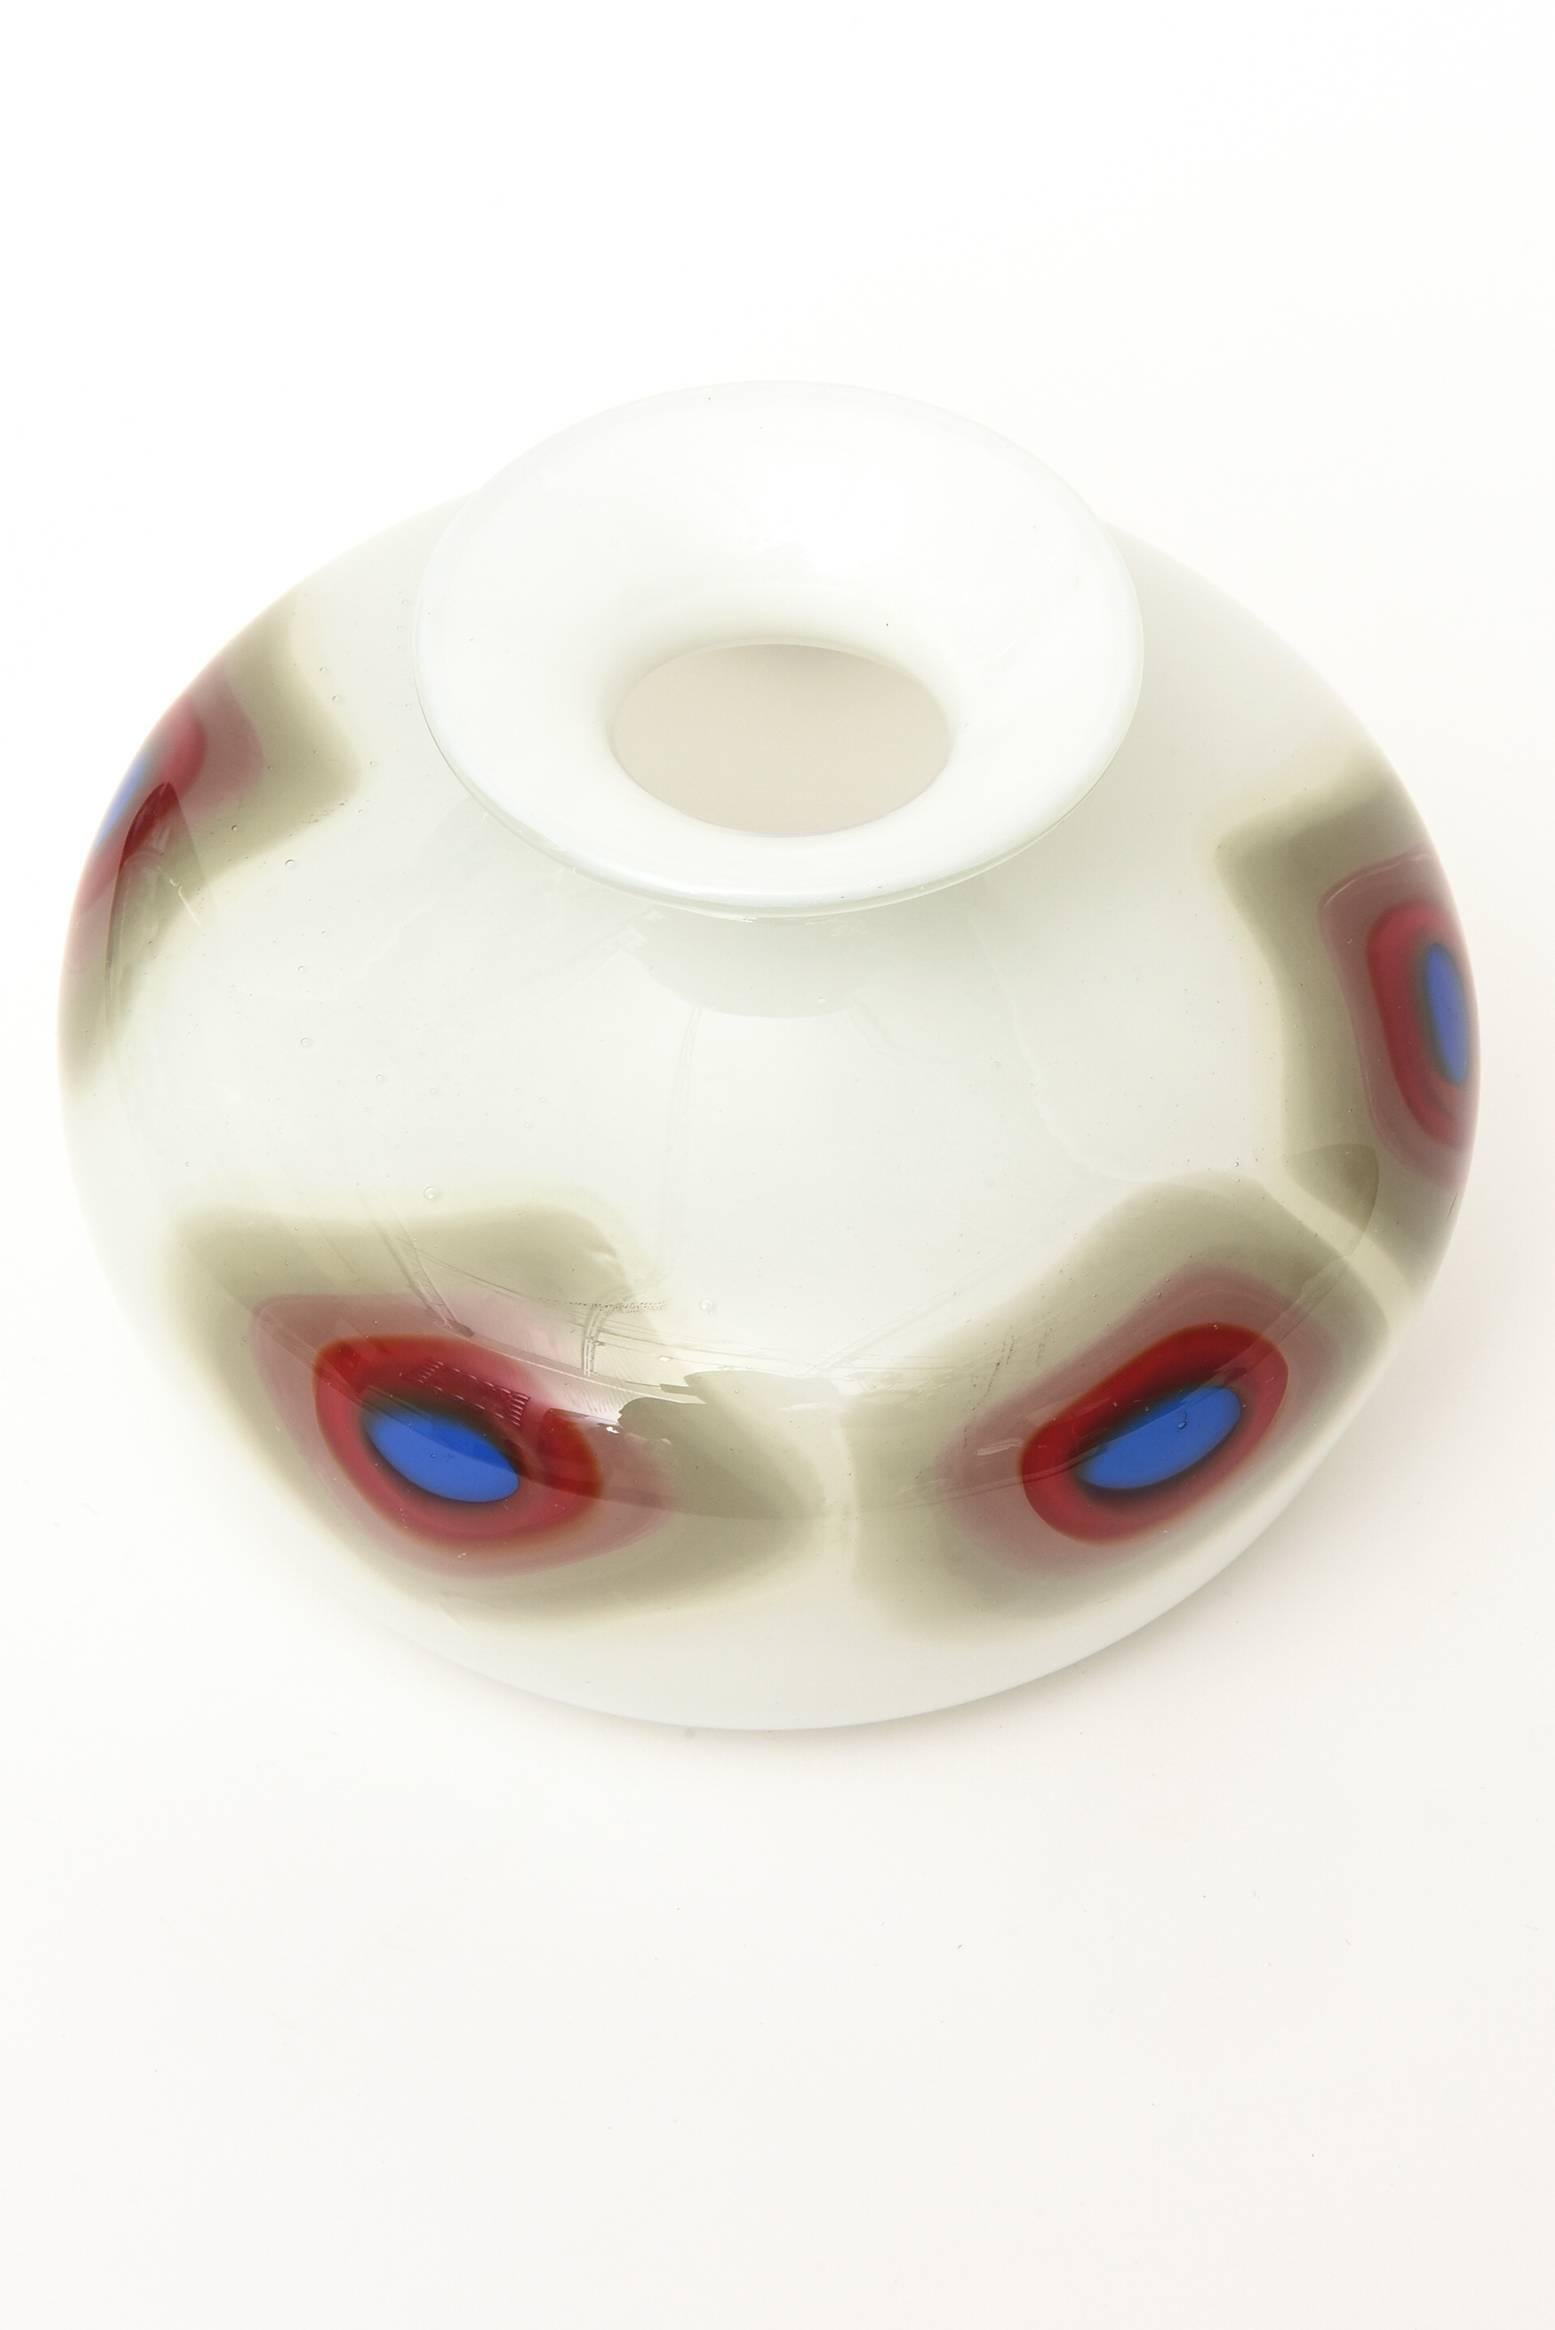 This graphic bullseye diamond pattern of this Italian Murano vase and or glass object stands alone as a great piece of glass. The white case glass is offset with a perimeter pattern of a diamond bullseye in colors that are radiants of gray that fade